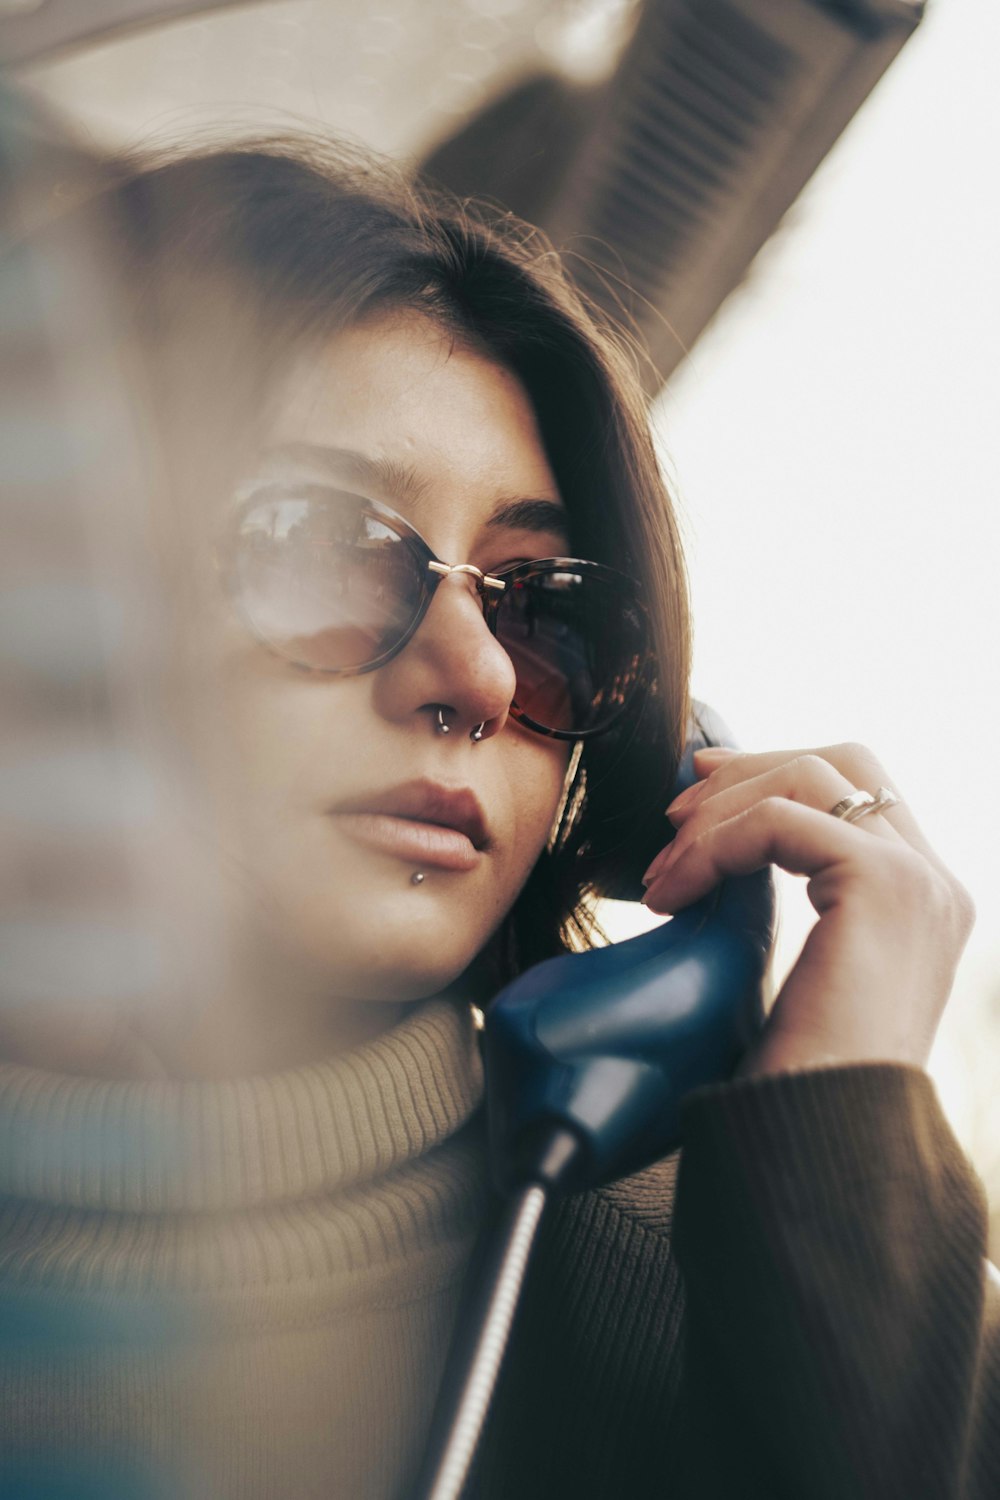 a woman wearing sunglasses talking on a cell phone